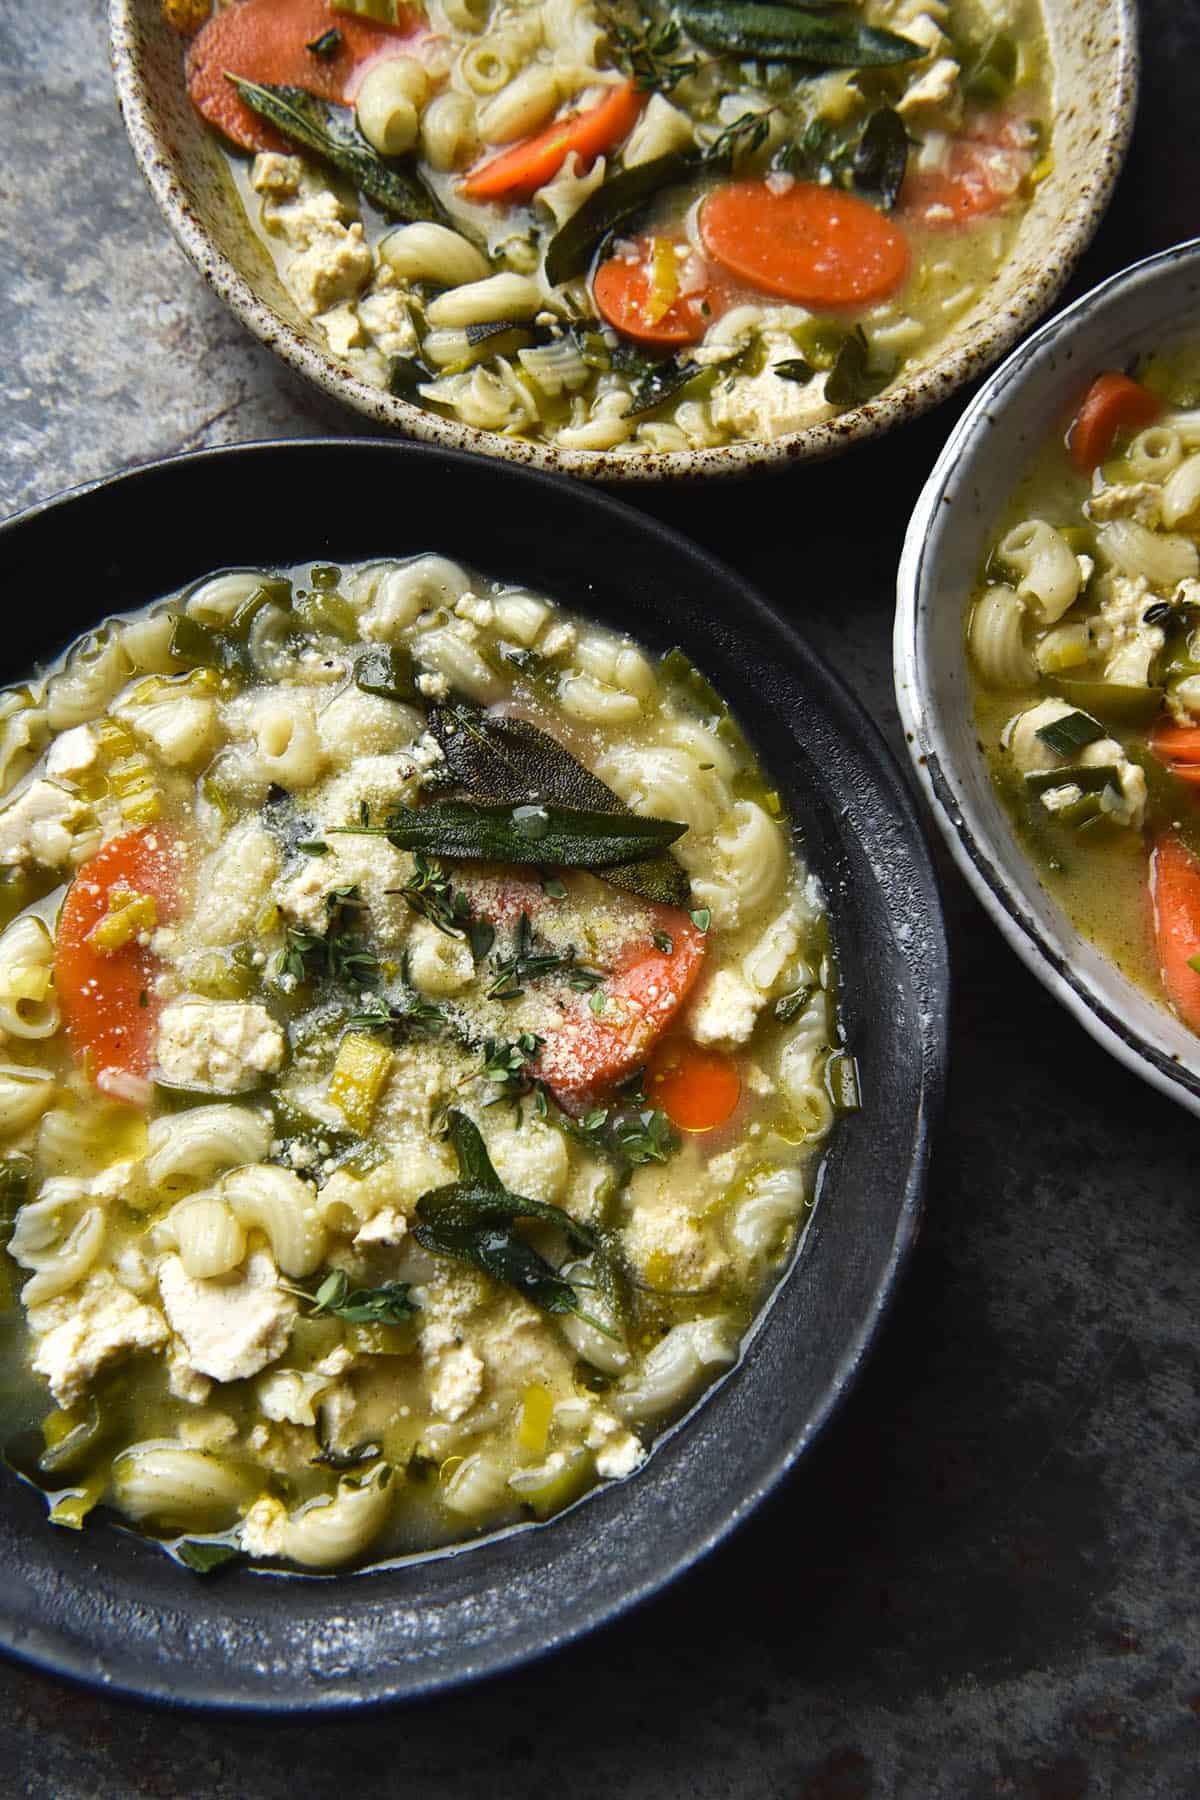 An aerial view of three bowls filled with FODMAP friendly vegan chicken noodle soup. The soup is topped with crispy sage leaves, parmesan and truffle oil, and the bowls sit atop a dark grey steel backdrop